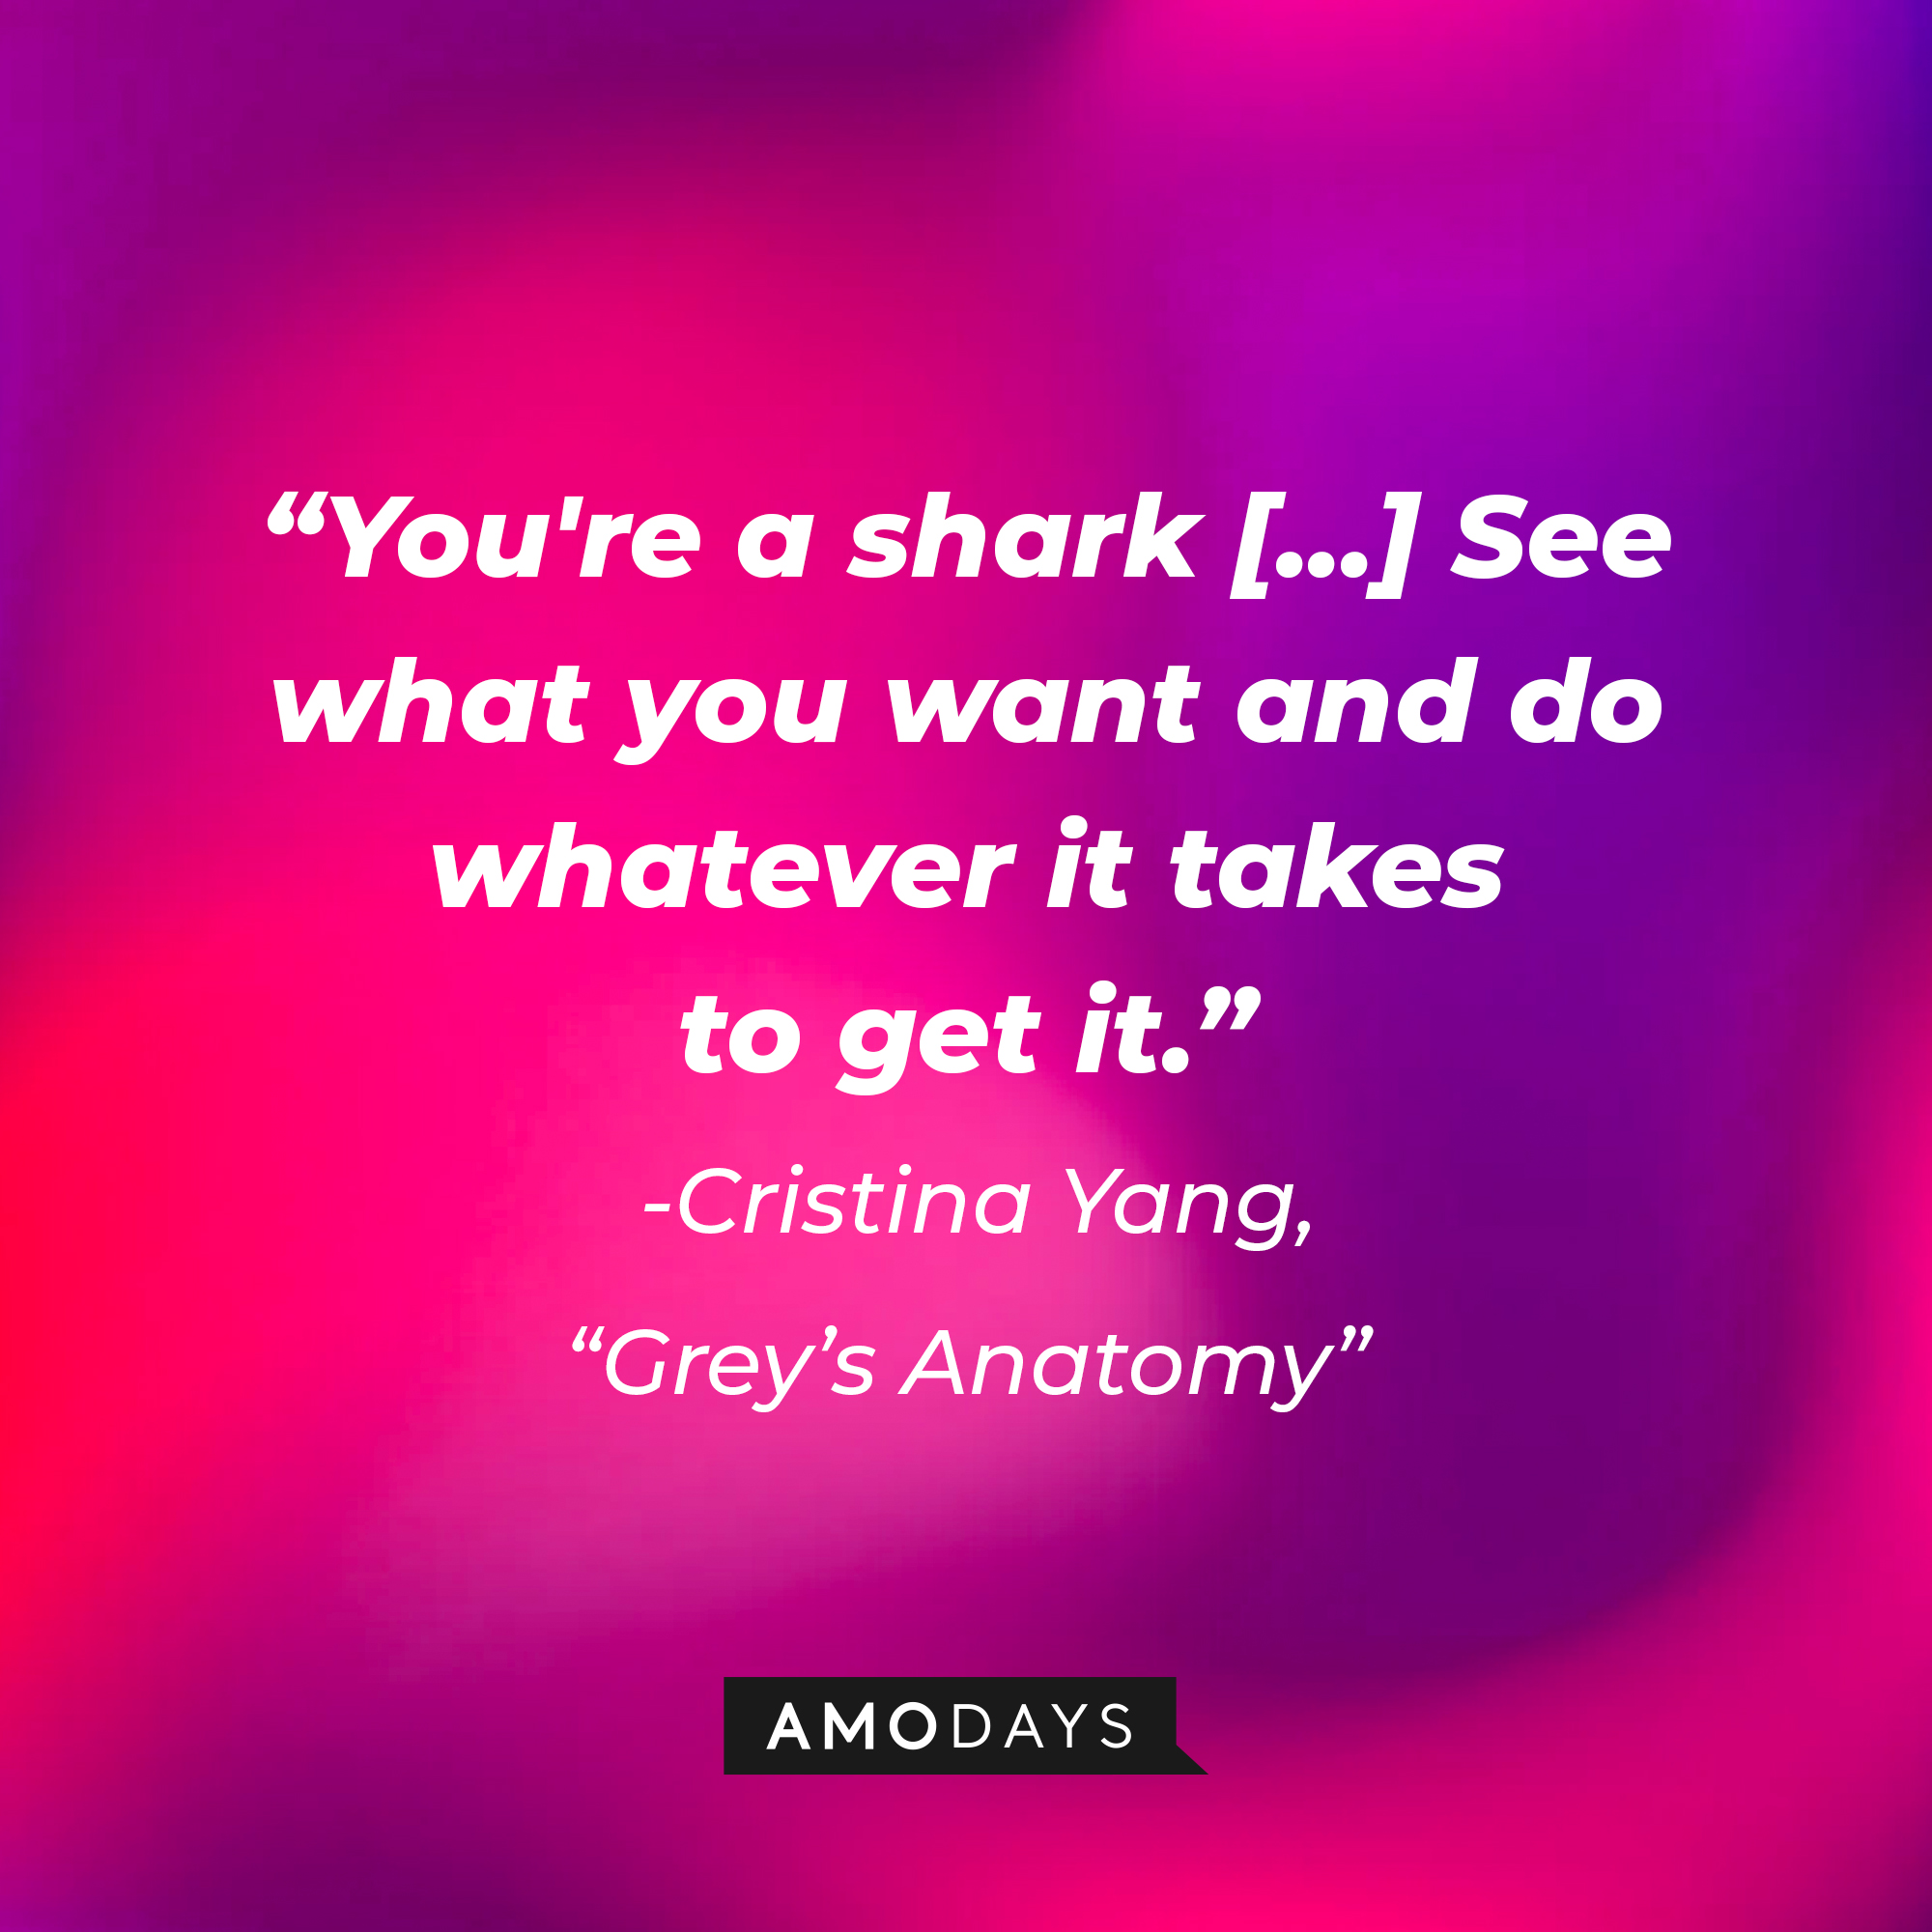 Cristina Yang's quote on "Grey's Anatomy:" "You're a shark [...] See what you want and do whatever it takes to get it." | Source: AmoDays